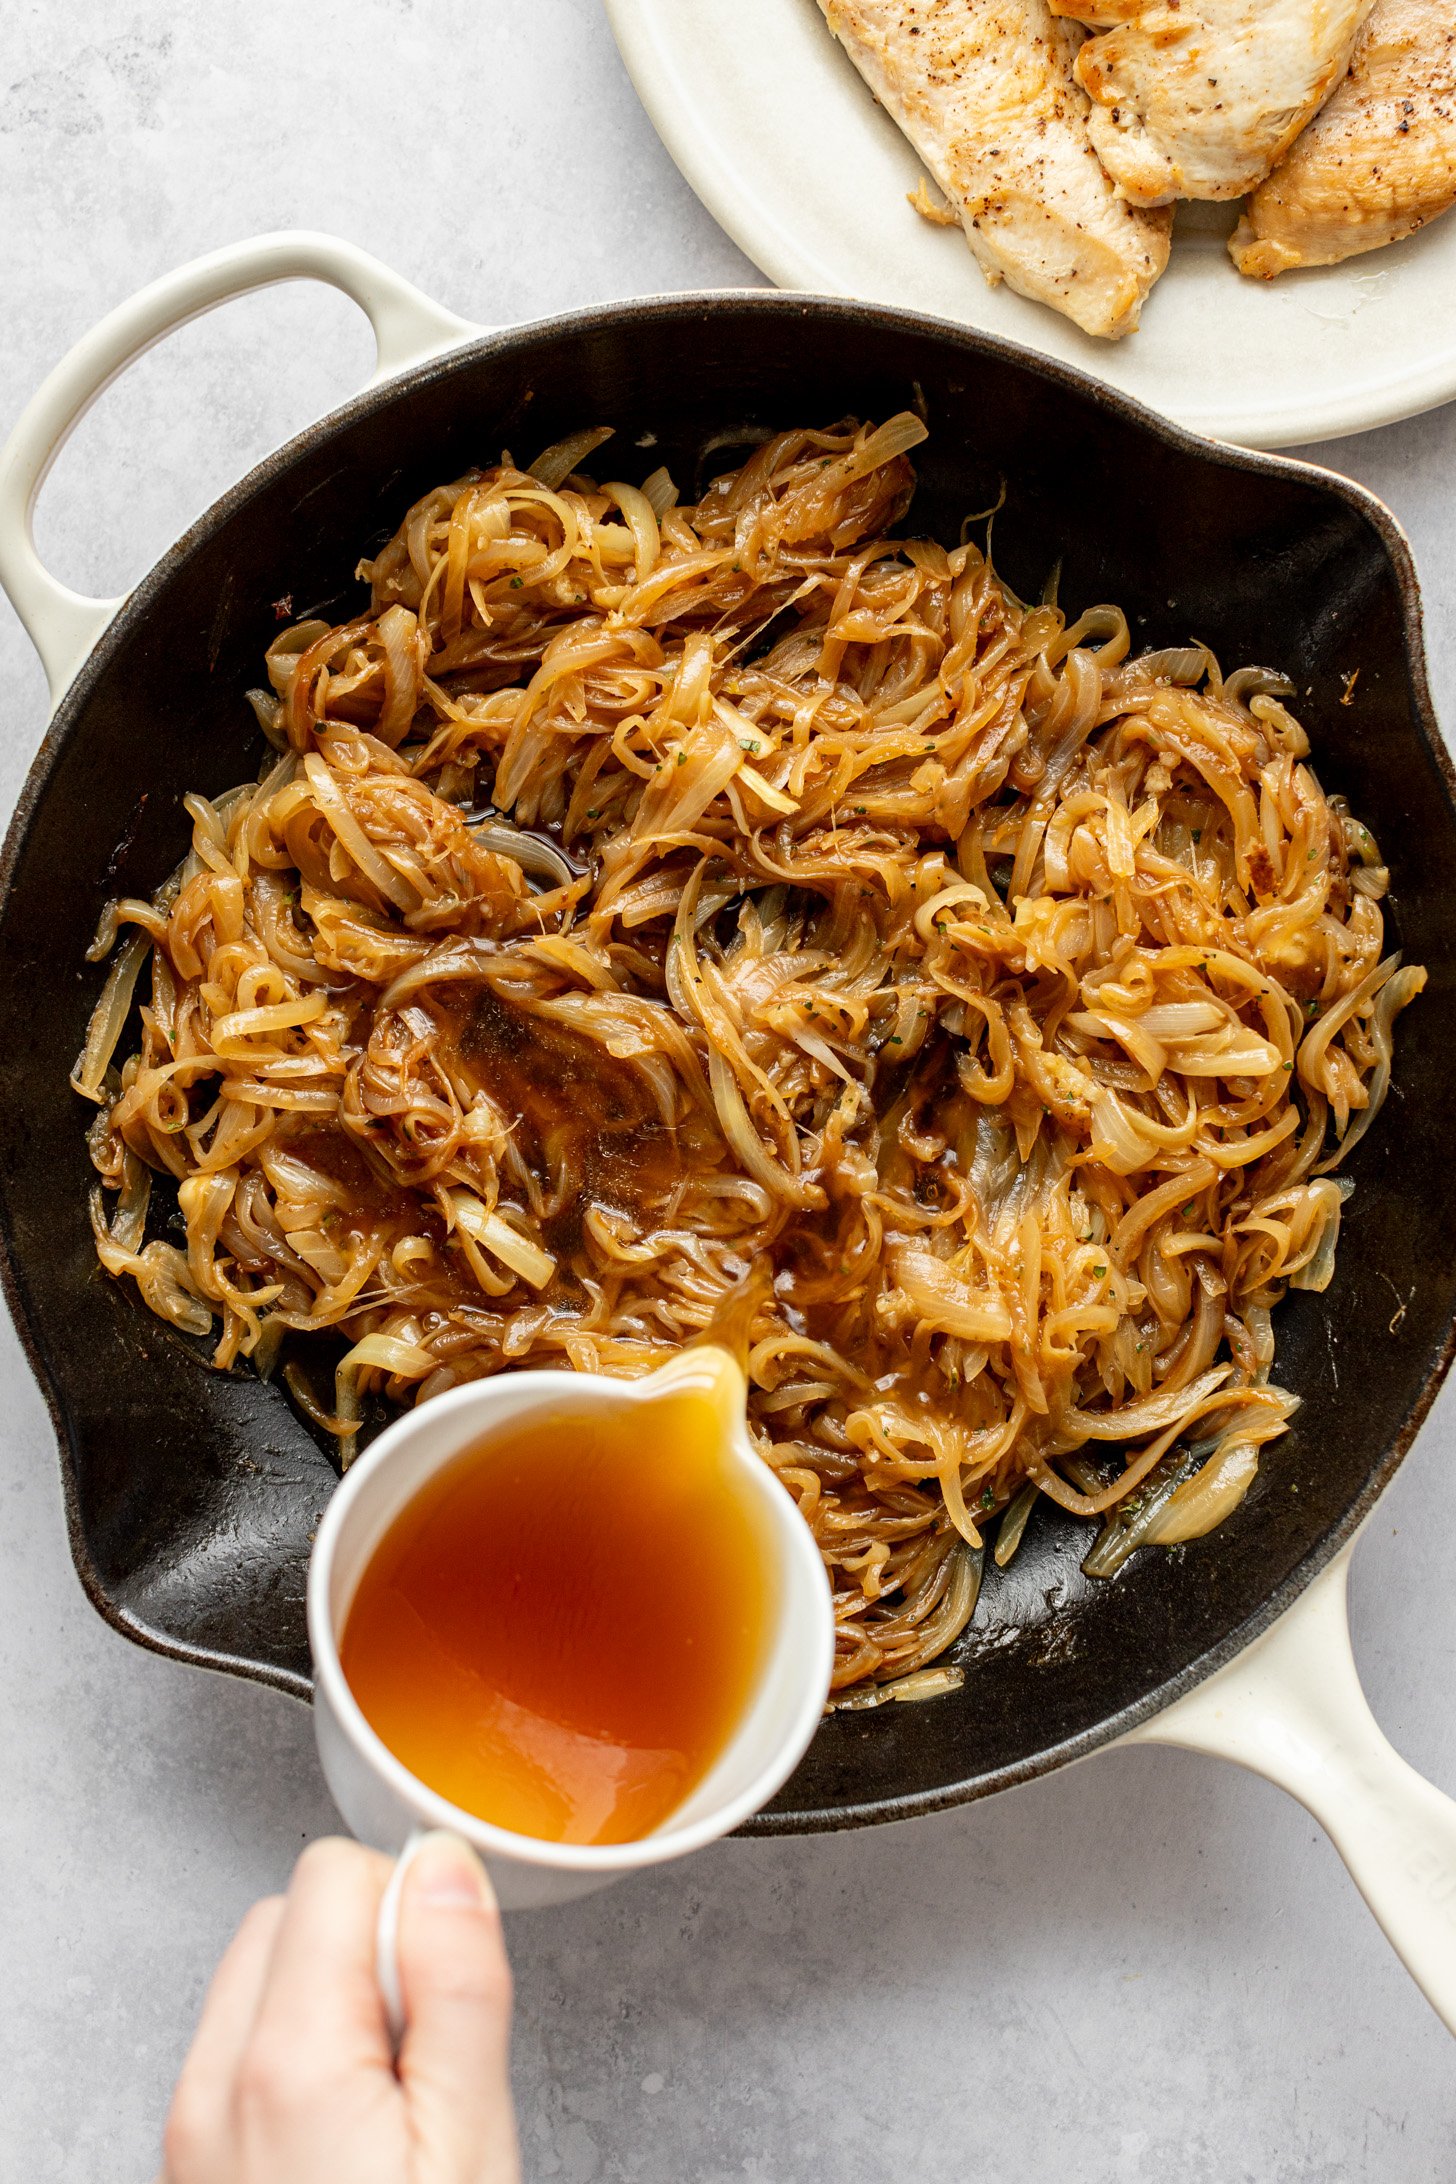 Broth and Worcestershire sauce are being poured into a cast iron skillet filled with caramelized onions. The skillet is sitting on a countertop surrounded by a plate filled with cooked chicken breasts.